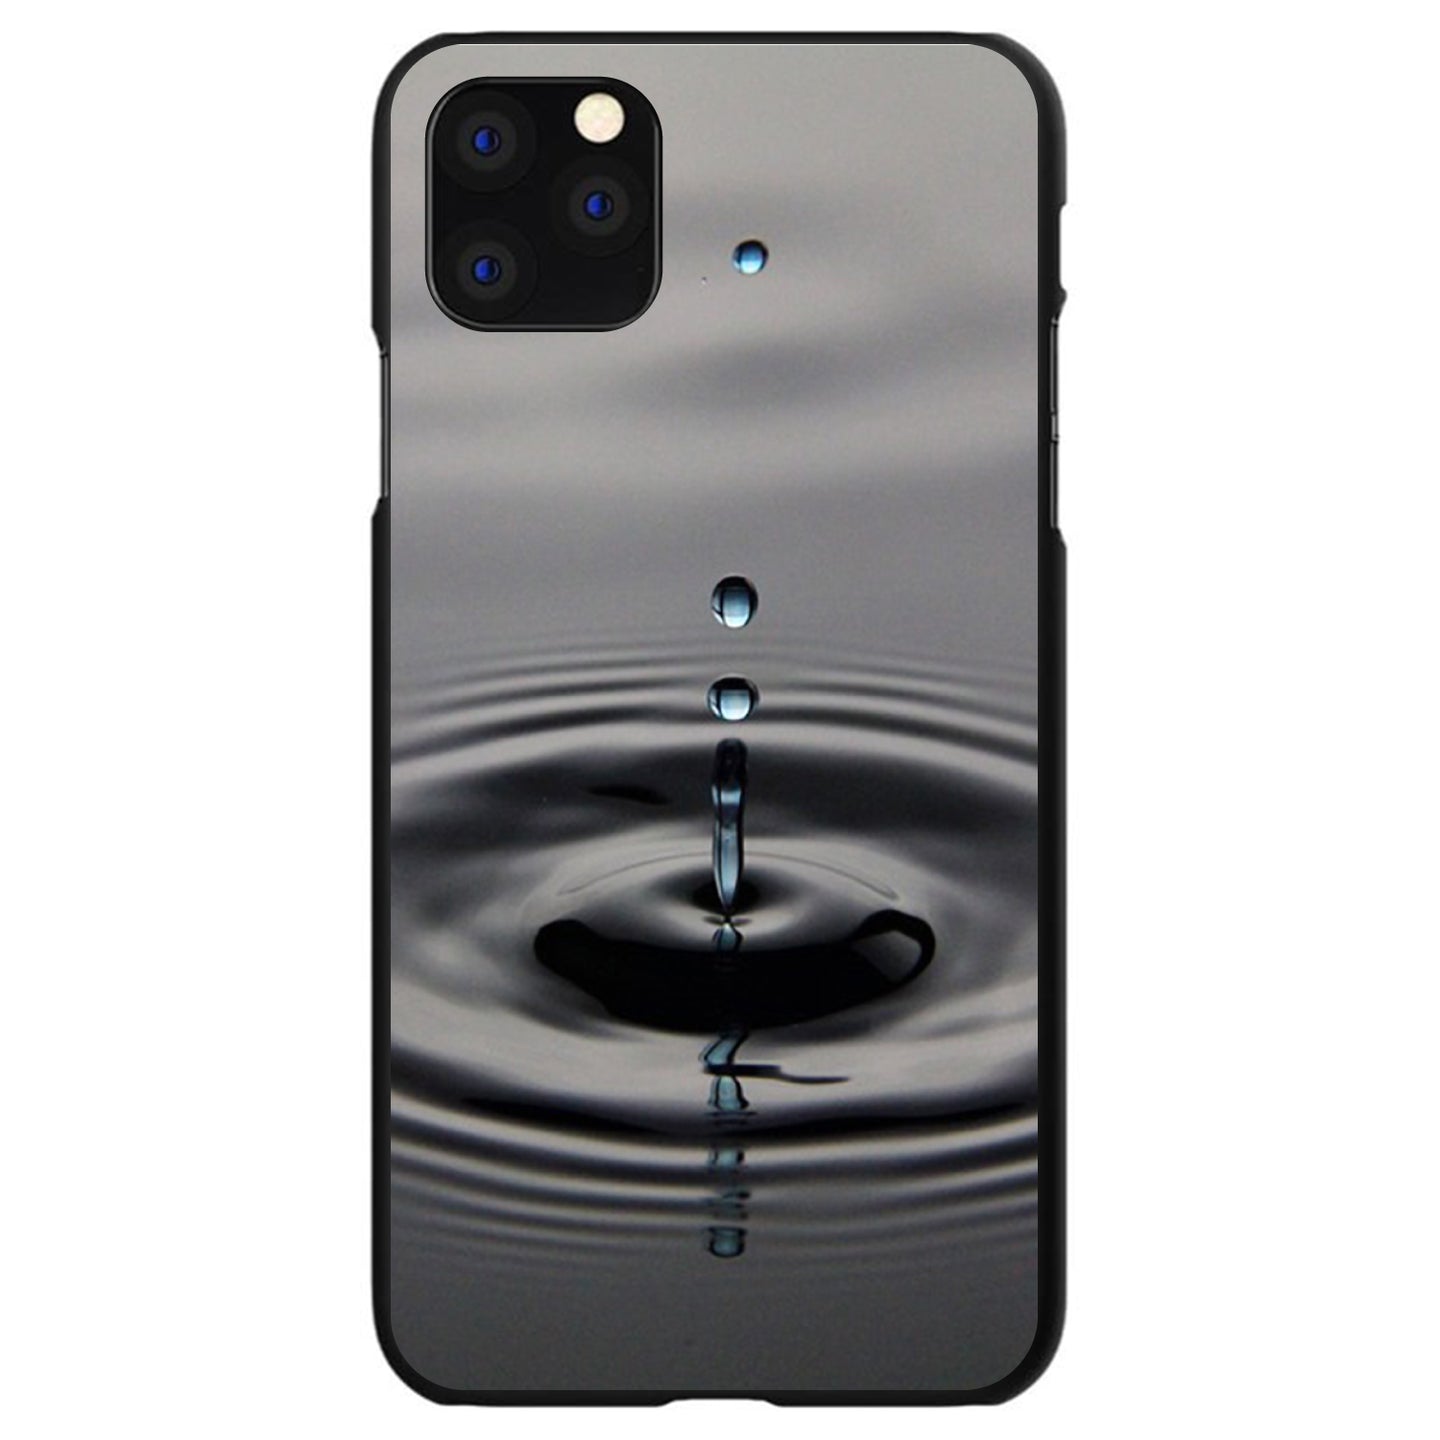 DistinctInk® Hard Plastic Snap-On Case for Apple iPhone or Samsung Galaxy - Single Water Droplet